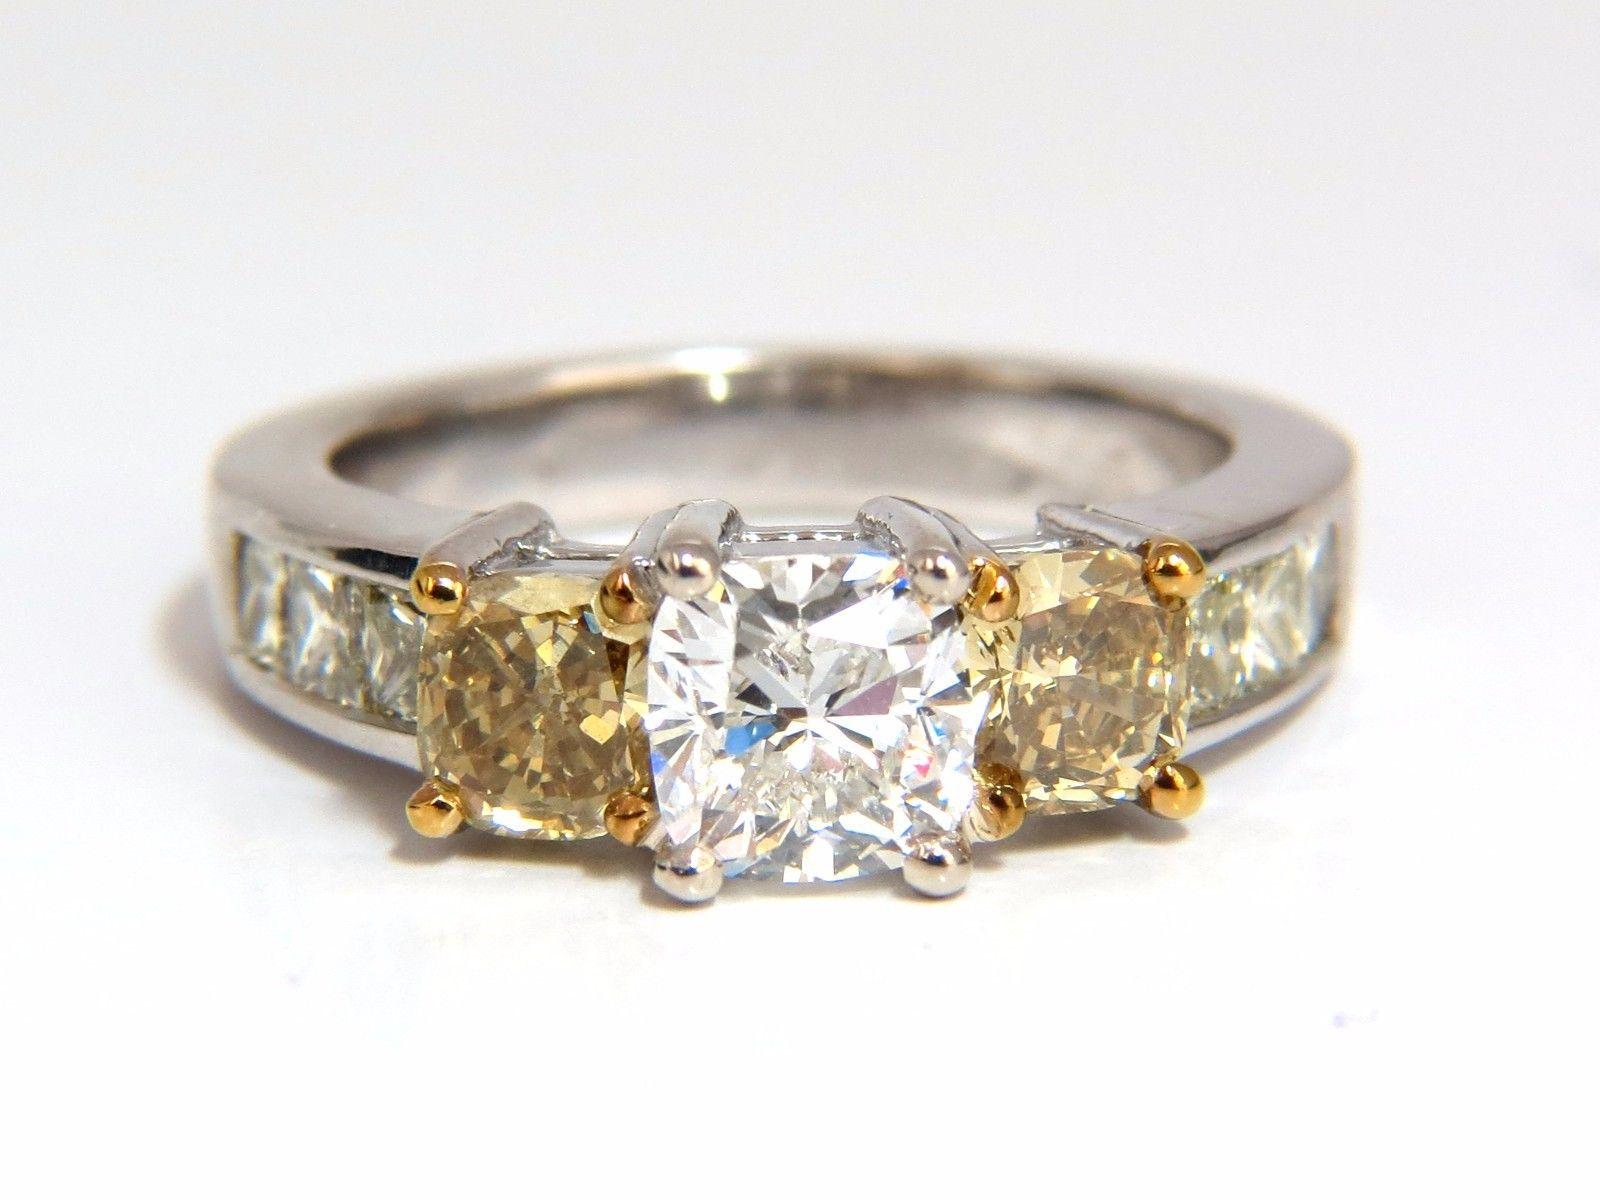 GIA 1.01ct cushion cut diamond ring.

G-color

vvs-2 clarity

Report Id: 2145774100

Please see attached photo for report. 

1.01ct. side cushion , full cut diamonds.

Fancy yellow orange browns

Vs-2 clarity.

Additional side princess cut